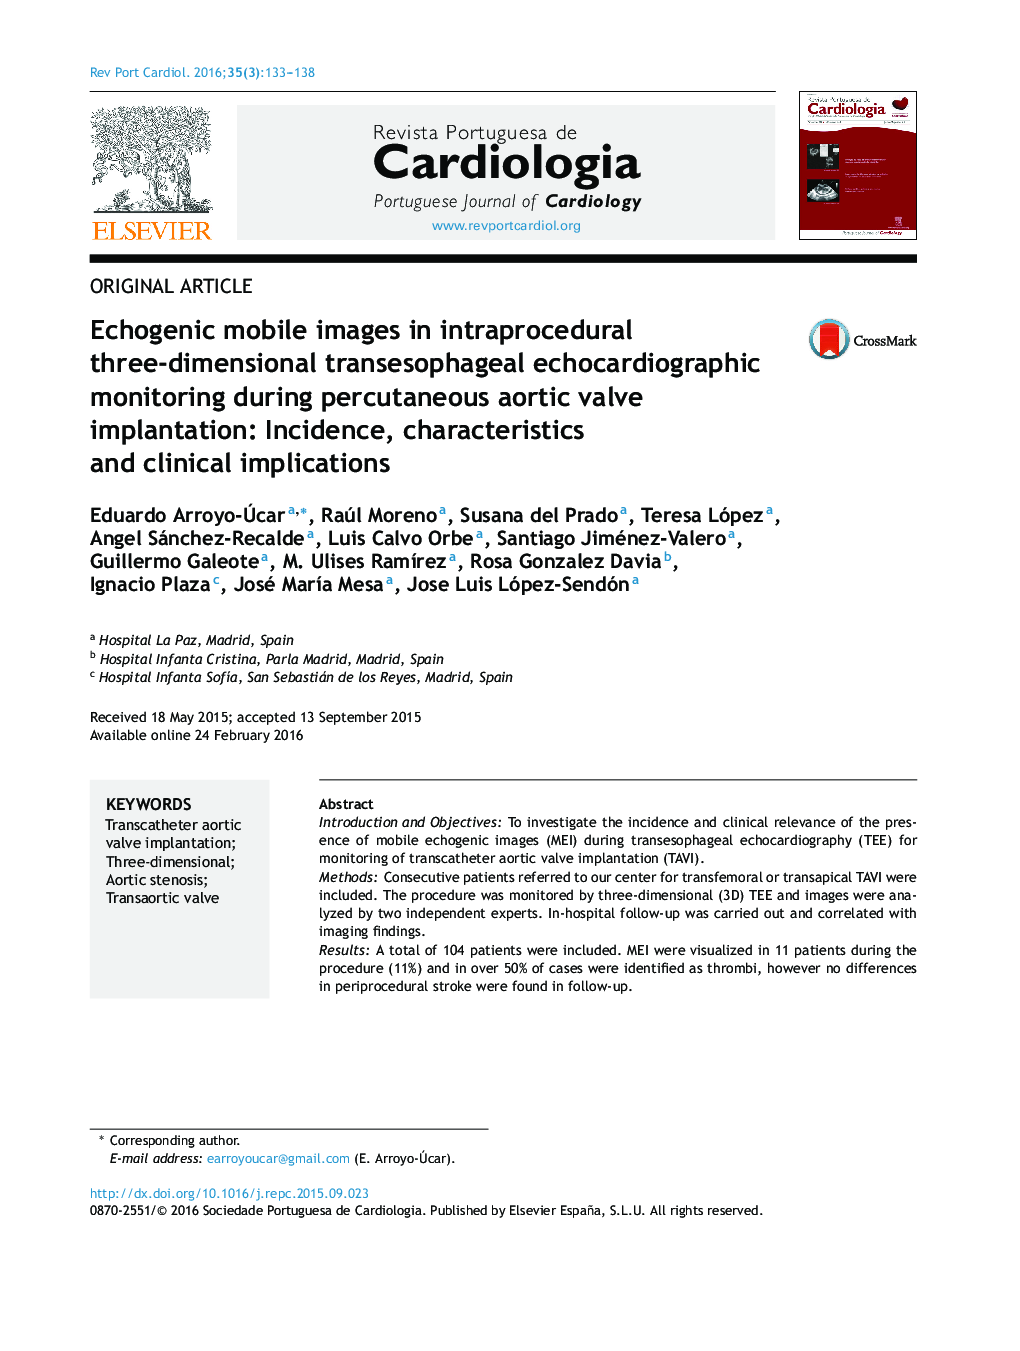 Echogenic mobile images in intraprocedural three-dimensional transesophageal echocardiographic monitoring during percutaneous aortic valve implantation: Incidence, characteristics and clinical implications